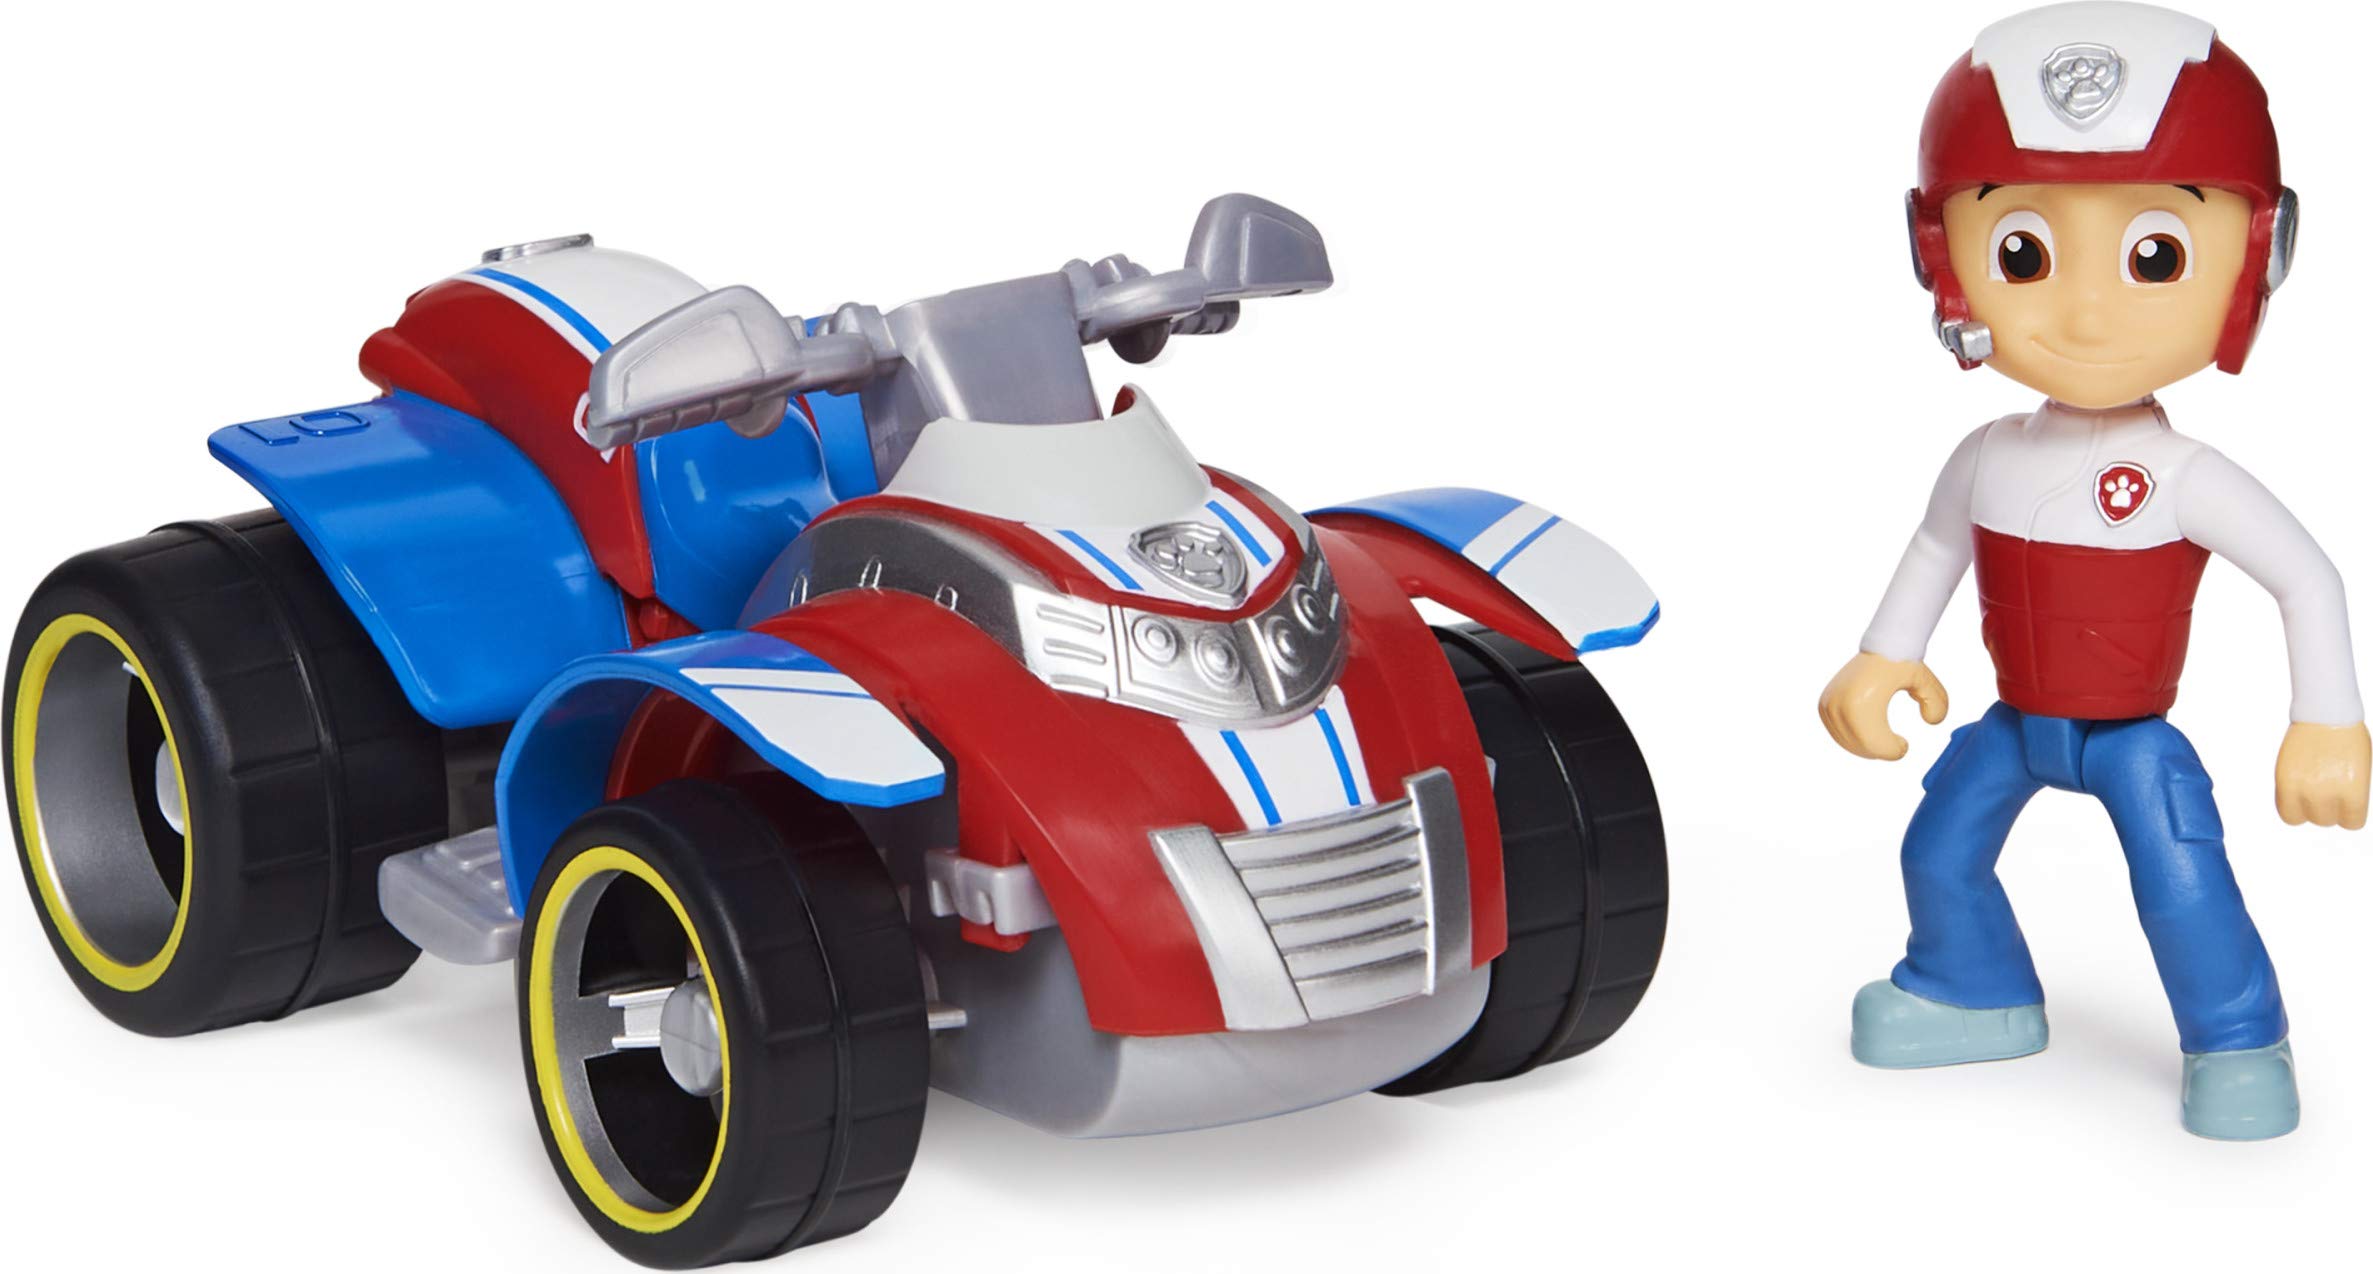 Paw Patrol, Ryder’s Rescue ATV Vehicle with Collectible Figure, for Kids Aged 3 and up